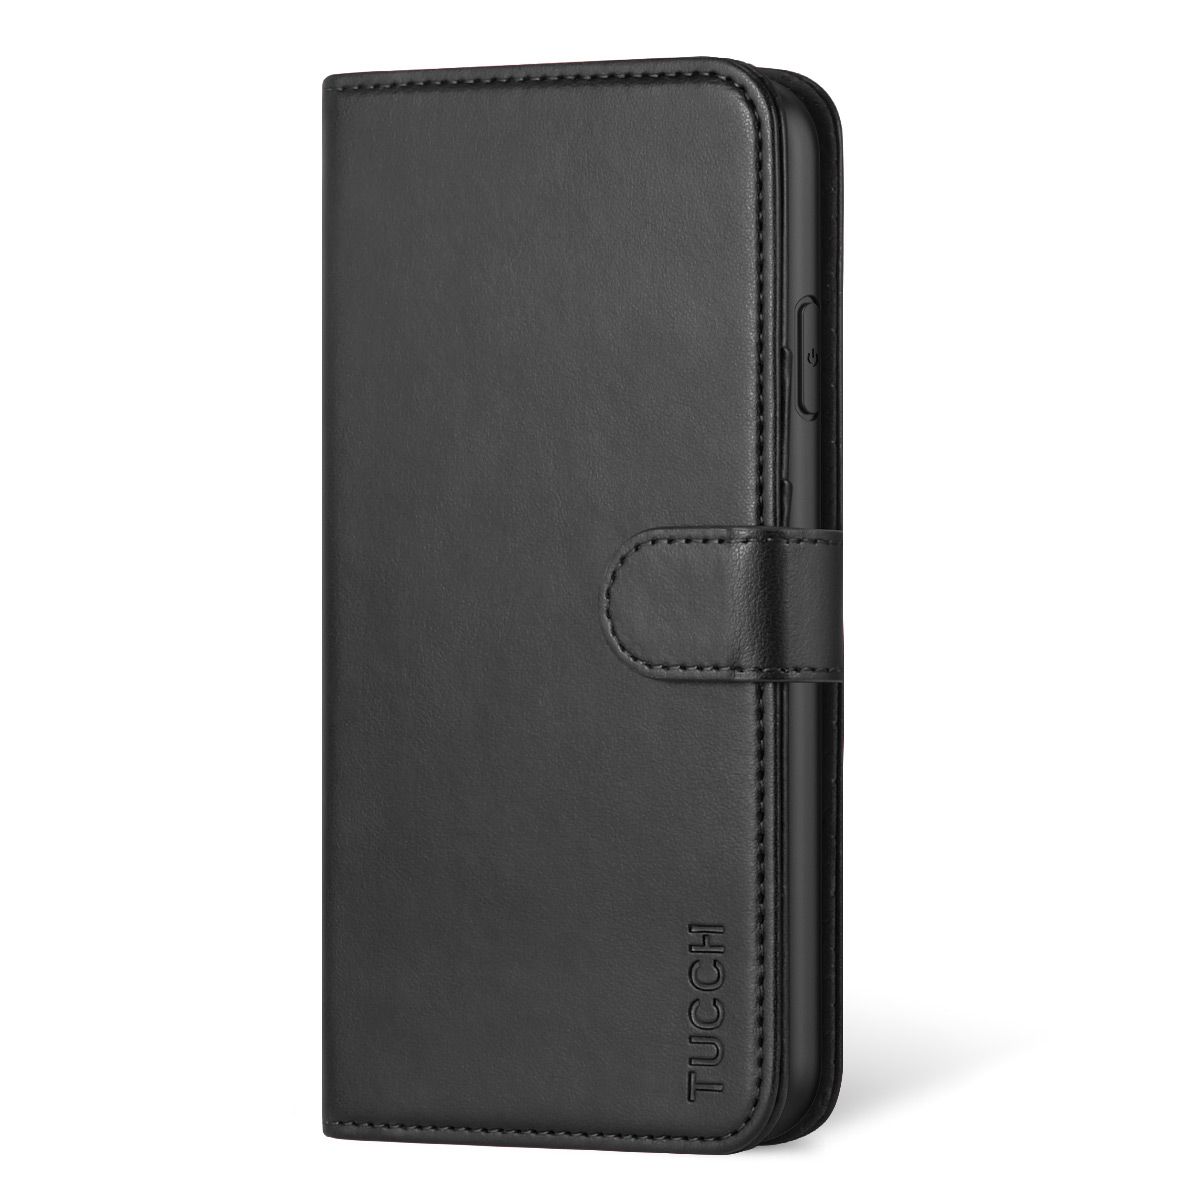 iPhone 11 Pro Max Wallet Case 2 in 1 iPhone 11 Pro Max, black Multifunctional Leather Zipper Shock-Absorption Detachable Removable Case Cover Coin Purse 14 Card Slots Stand Shell for iPhone 11 Pro Max iPhone 11 Pro Max Detachable Flip Cover,